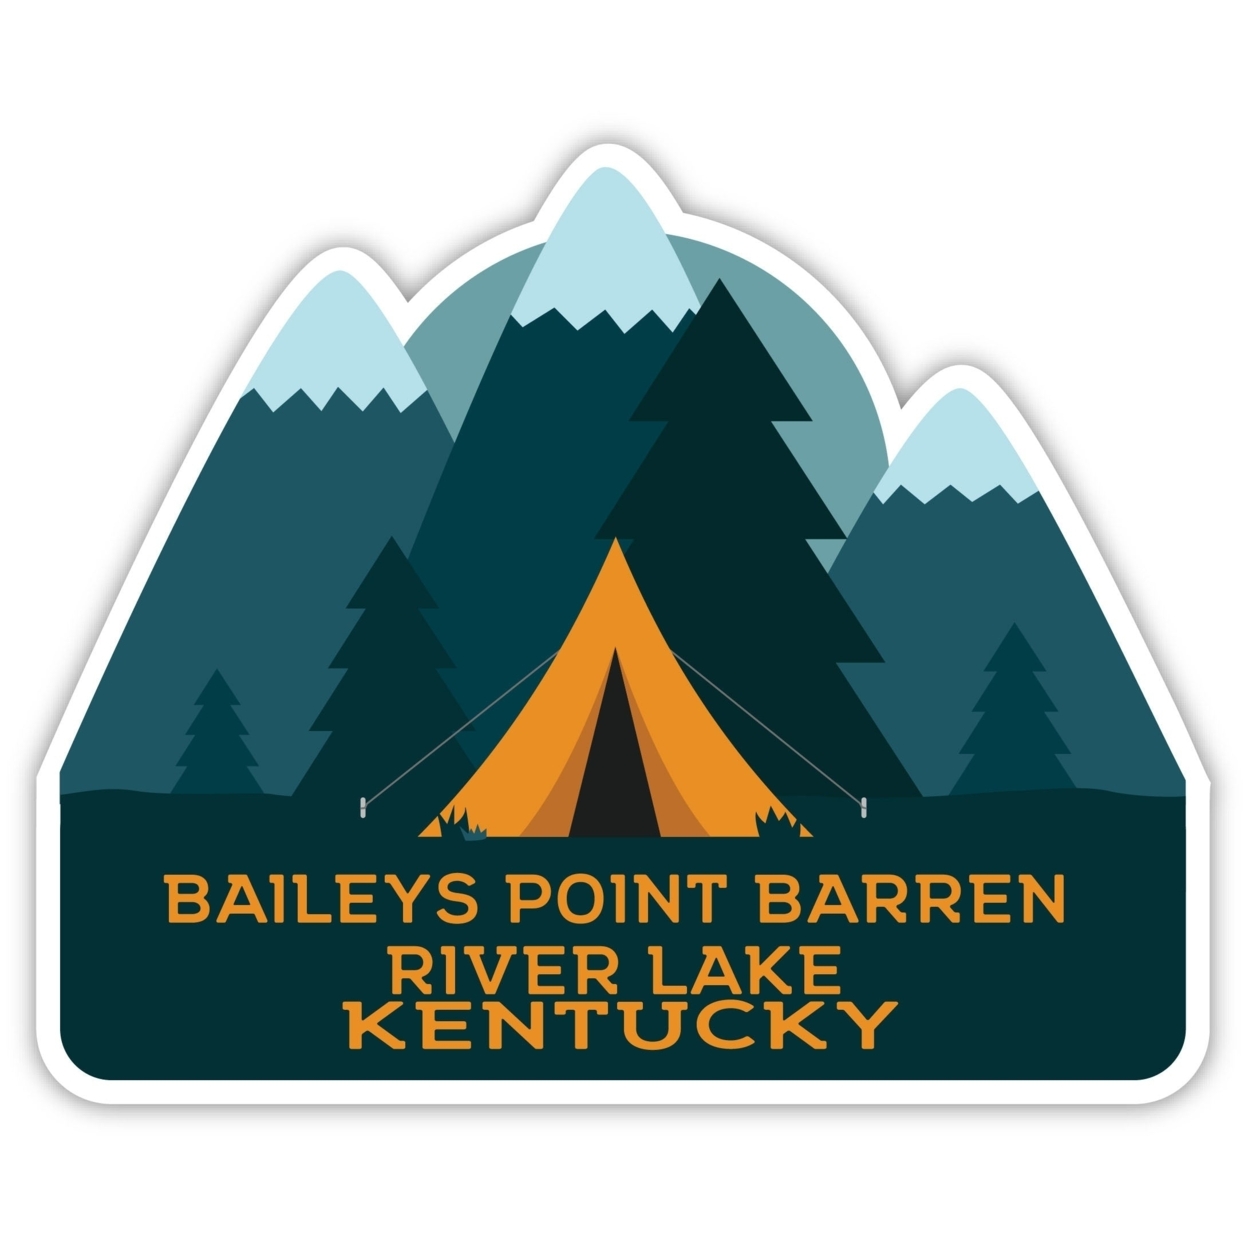 Baileys Point Barren River Lake Kentucky Souvenir Decorative Stickers (Choose Theme And Size) - 4-Pack, 8-Inch, Tent